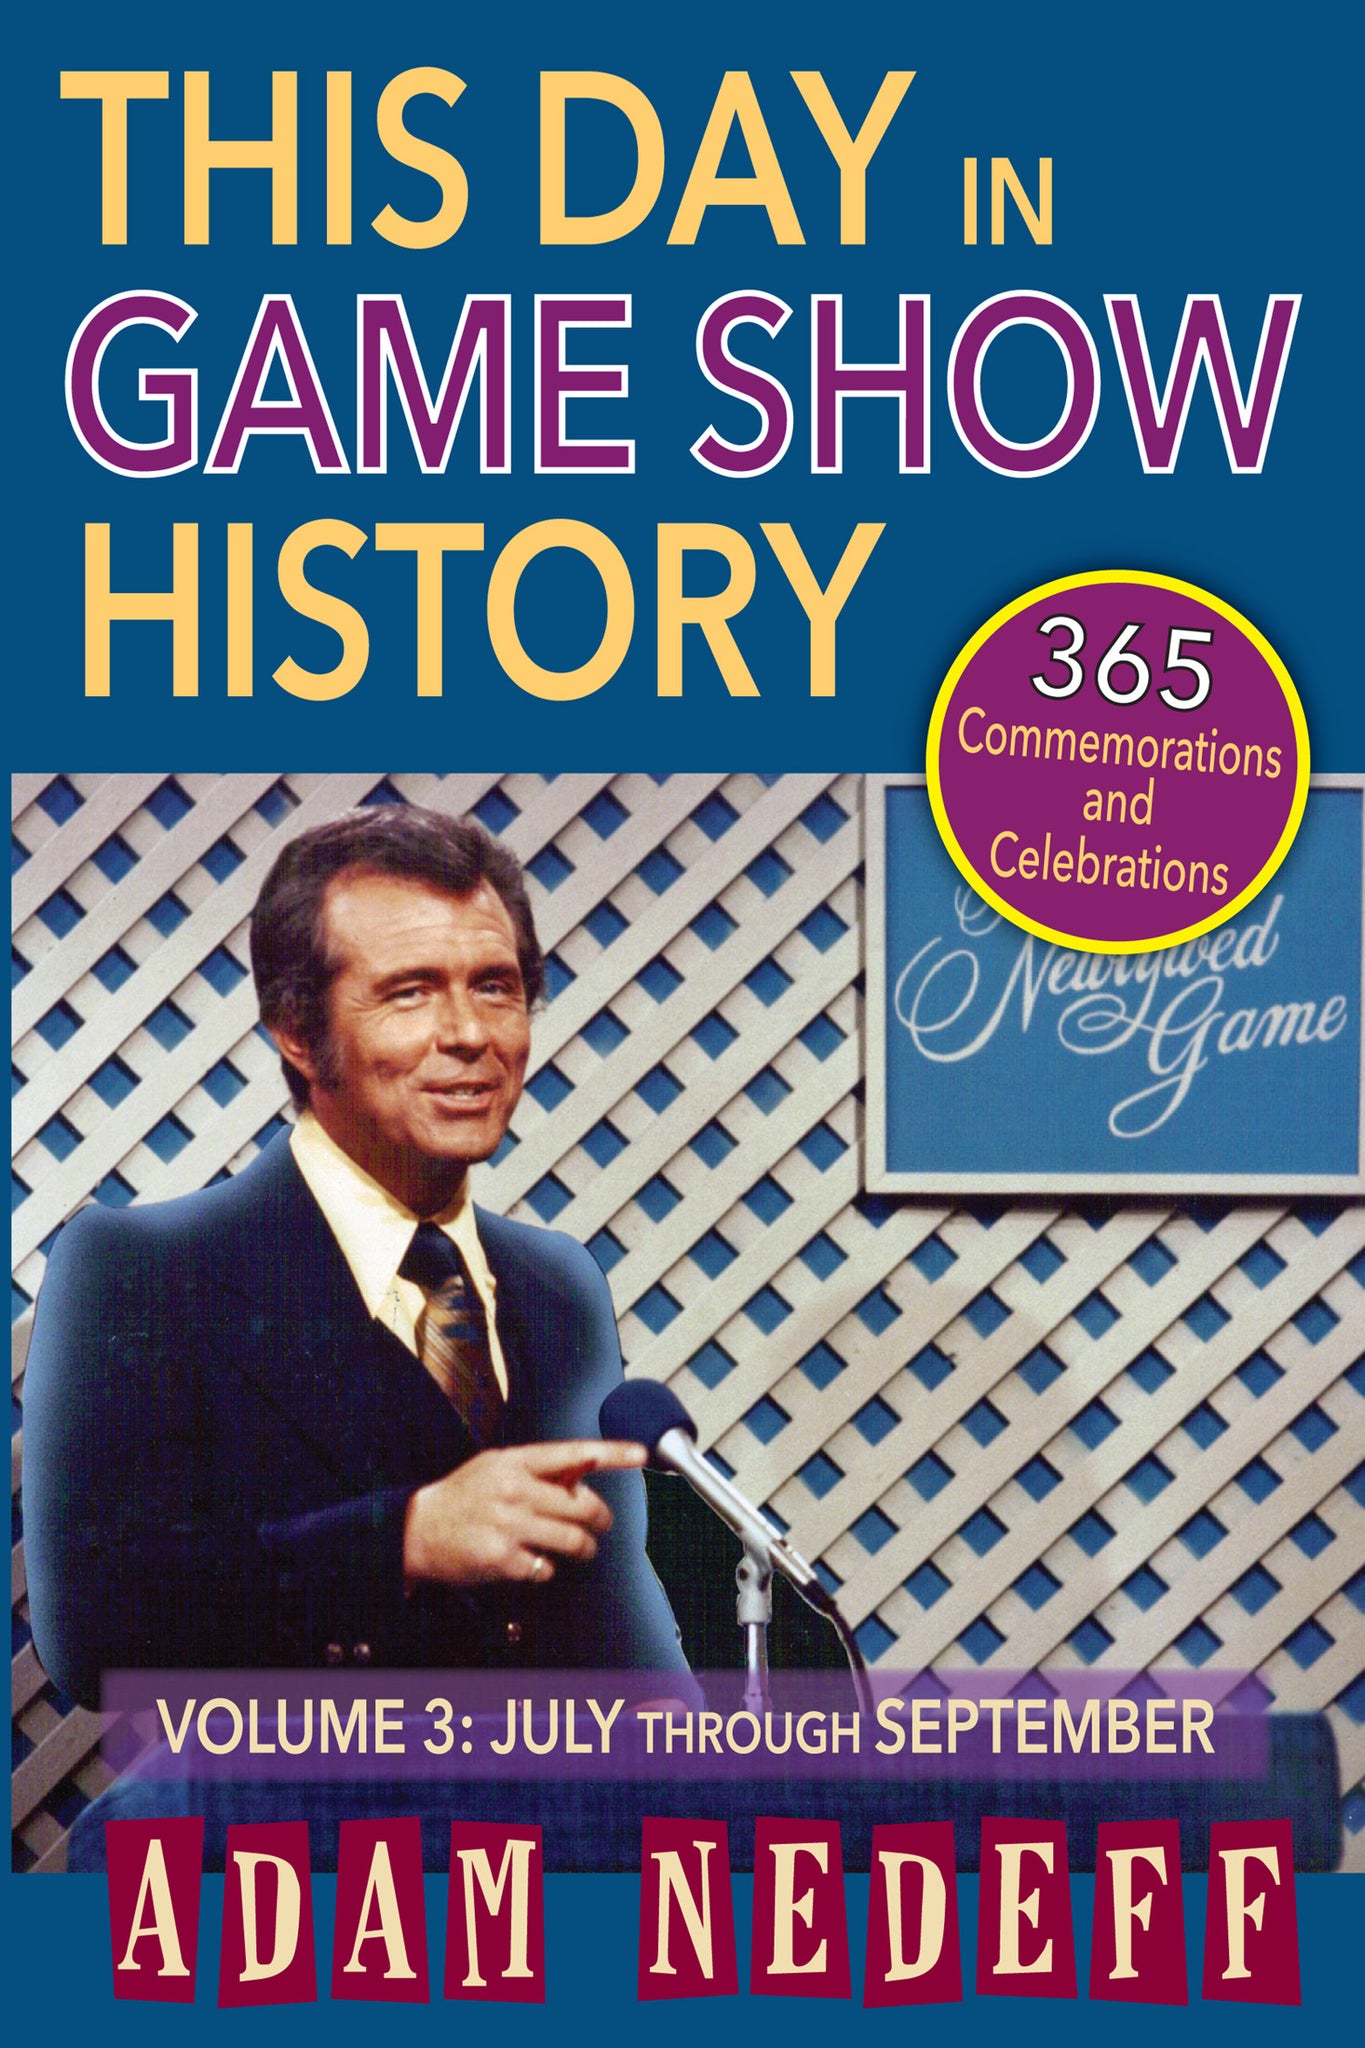 This Day in Game Show History- 365 Commemorations and Celebrations, Vol. 3: July Through September (ebook) - BearManor Manor